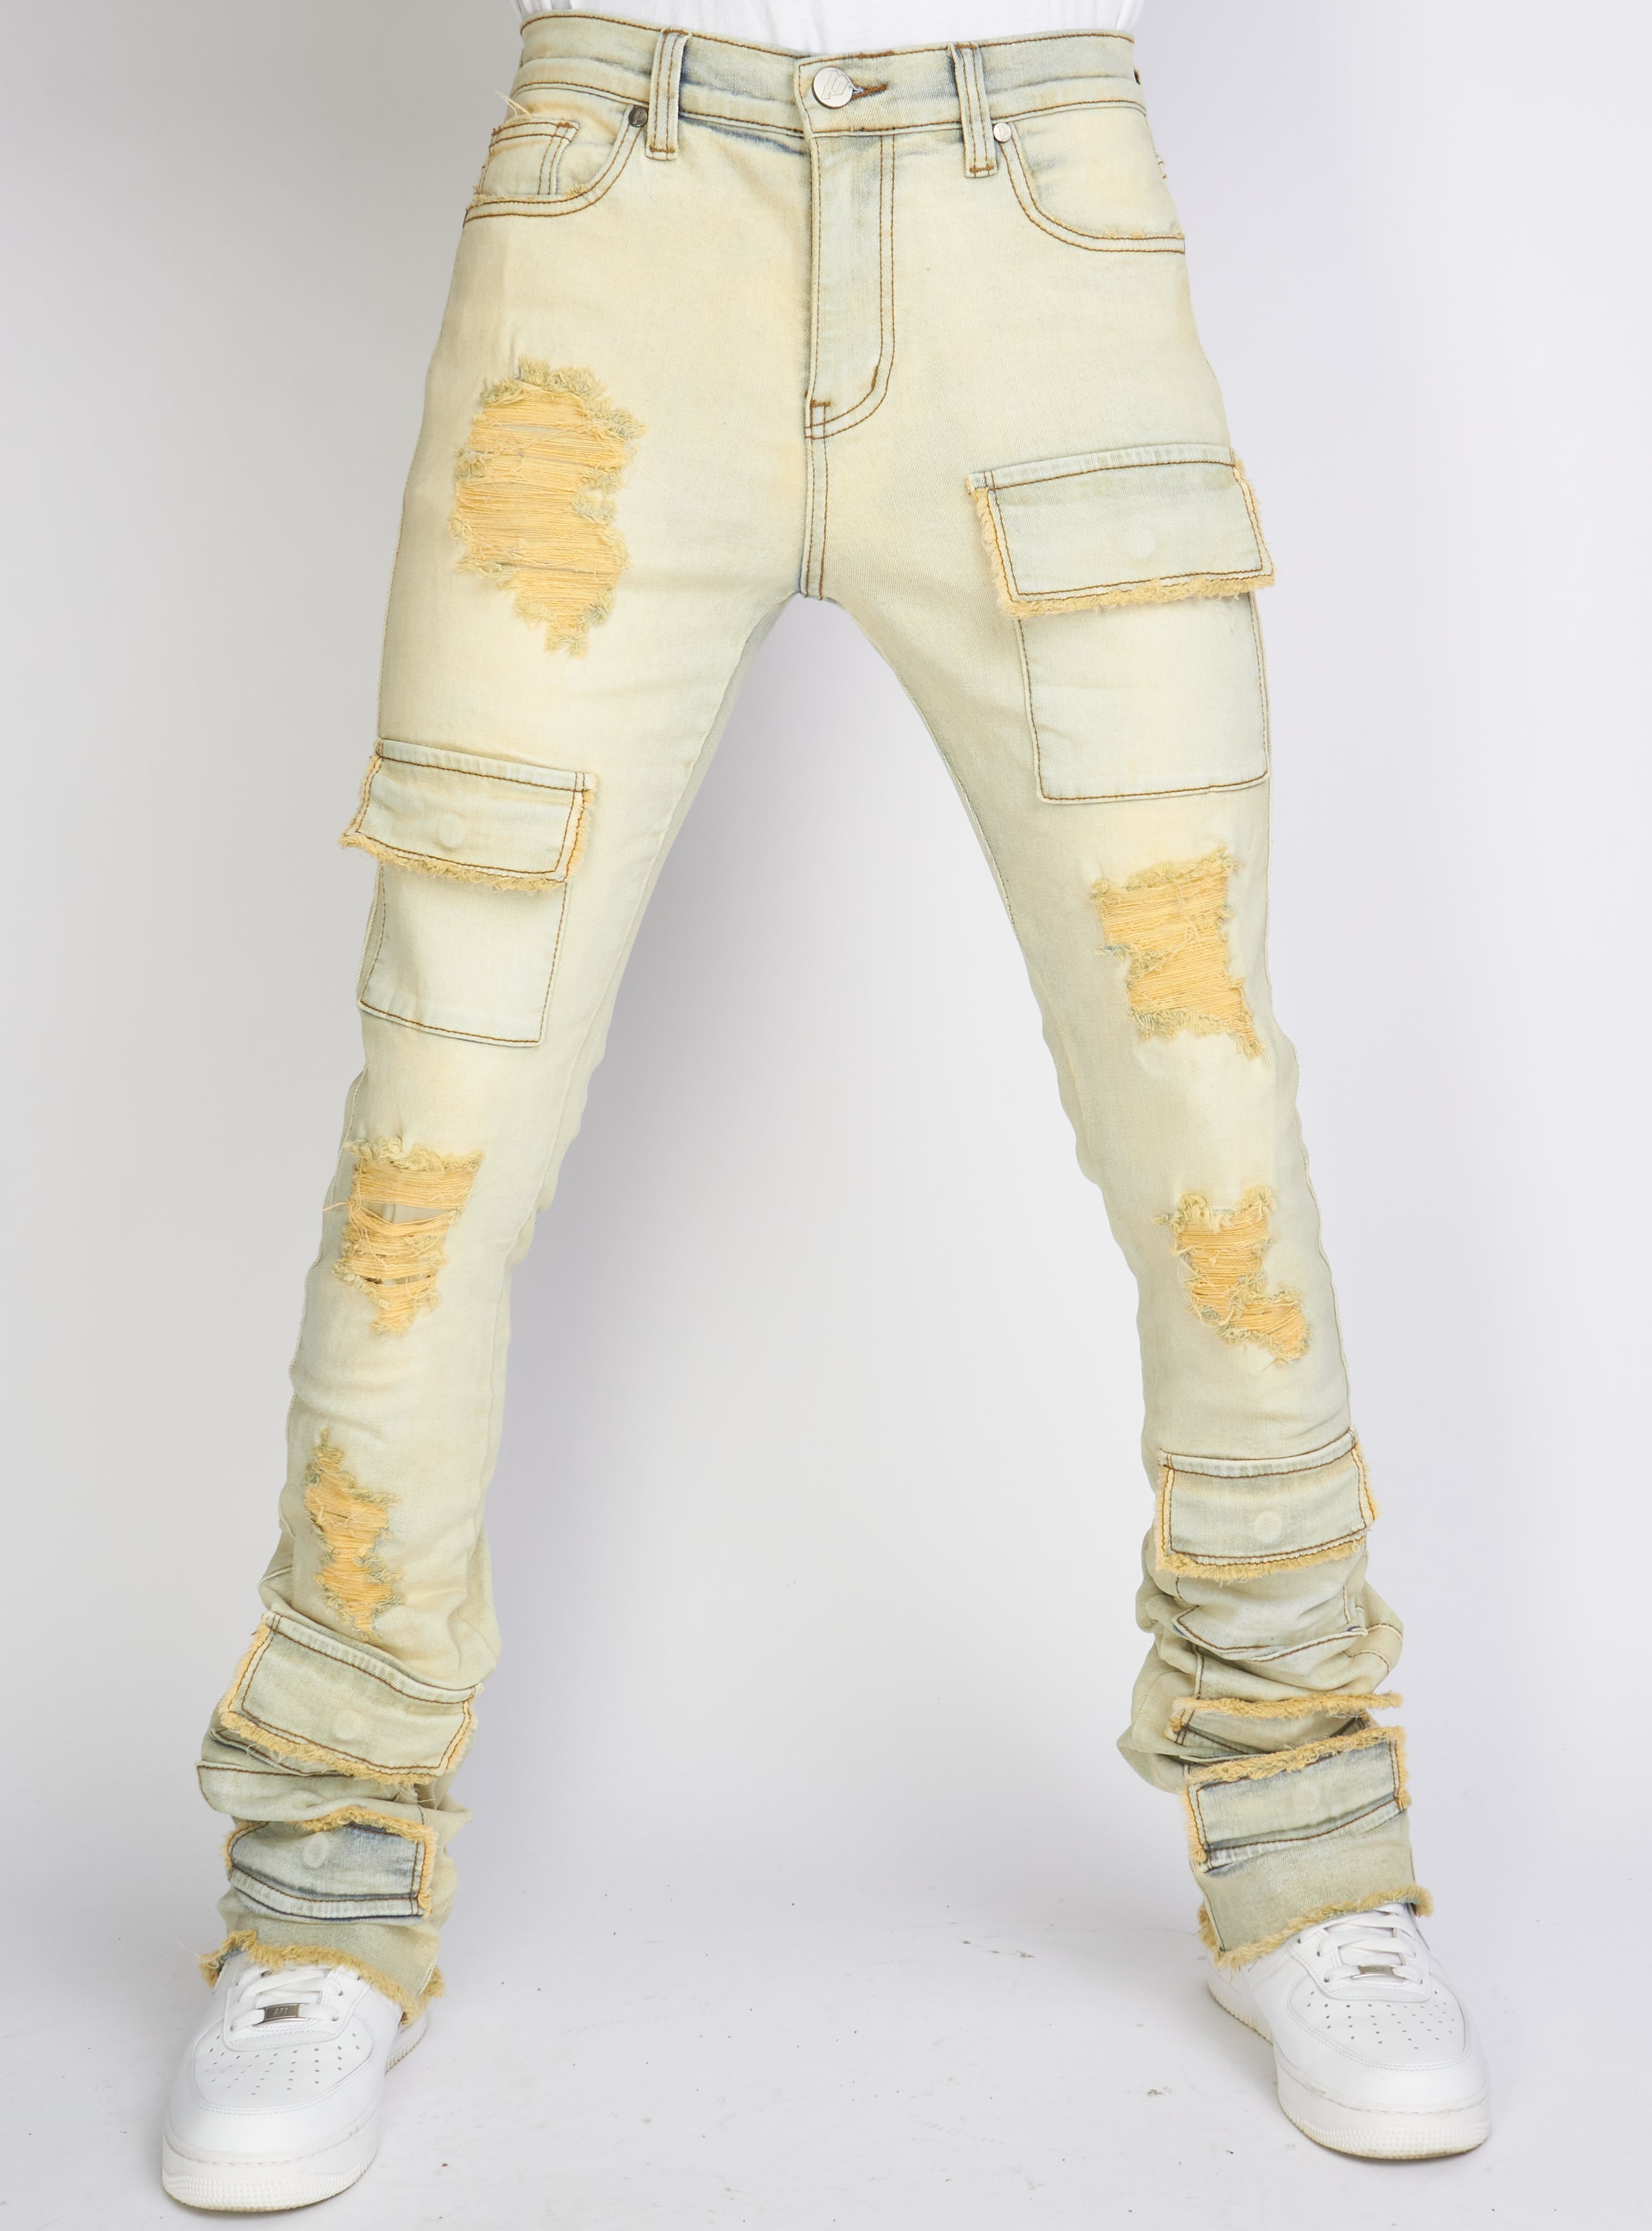 Journey Collection Kim jeans in off-white cotton with diamond patterns and  the addition of beads and crystals | Golden Goose